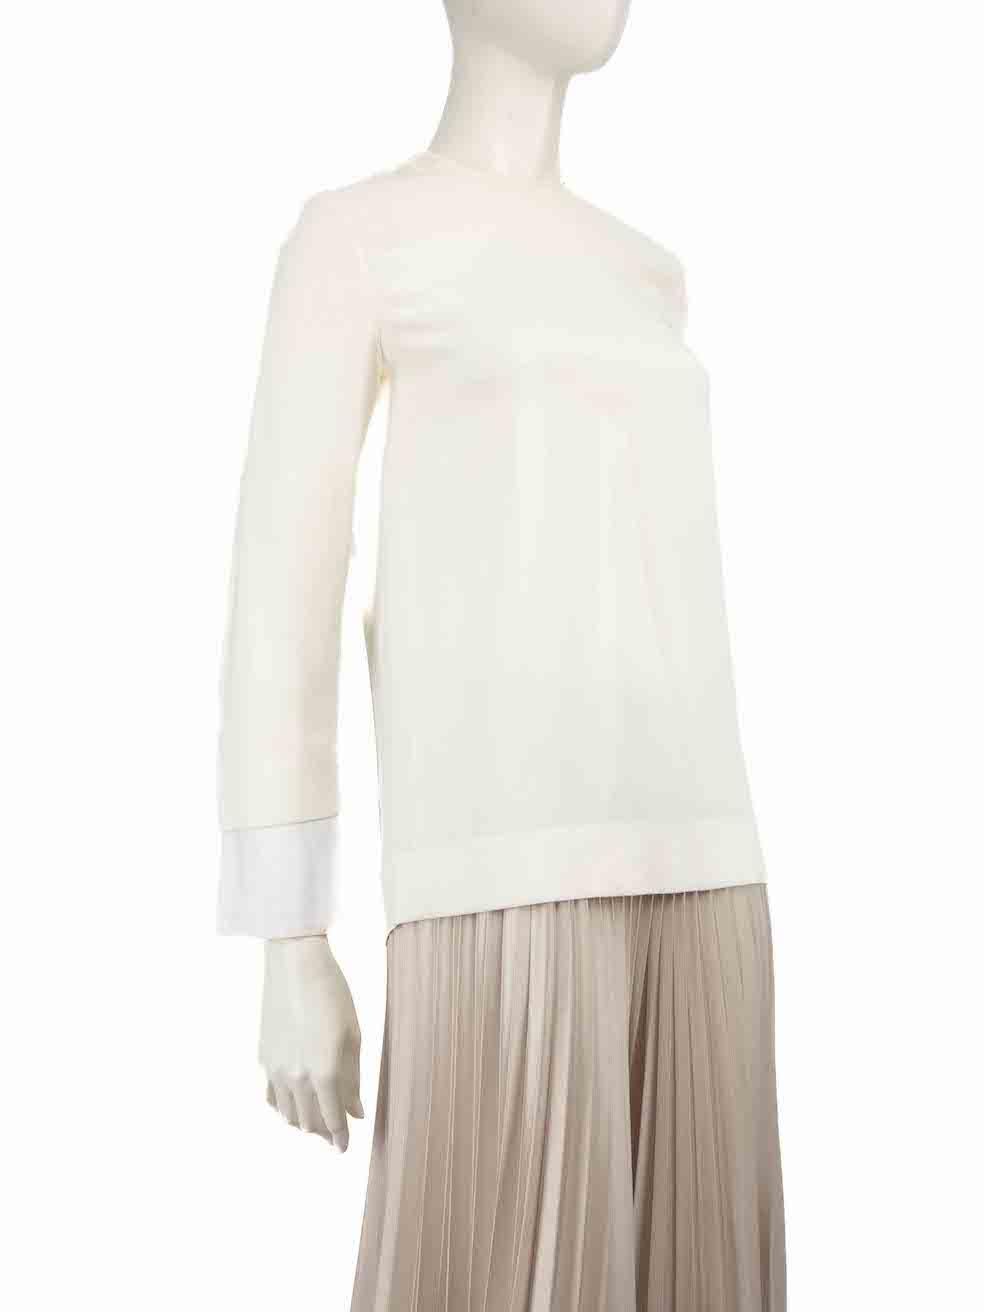 CONDITION is Very good. Minimal wear to top is evident. Minimal wear to right shoulder with discoloured mark on this used The Row designer resale item.
 
 
 
 Details
 
 
 White
 
 Viscose
 
 Long sleeves top
 
 Round neckline
 
 Double layer sleeve